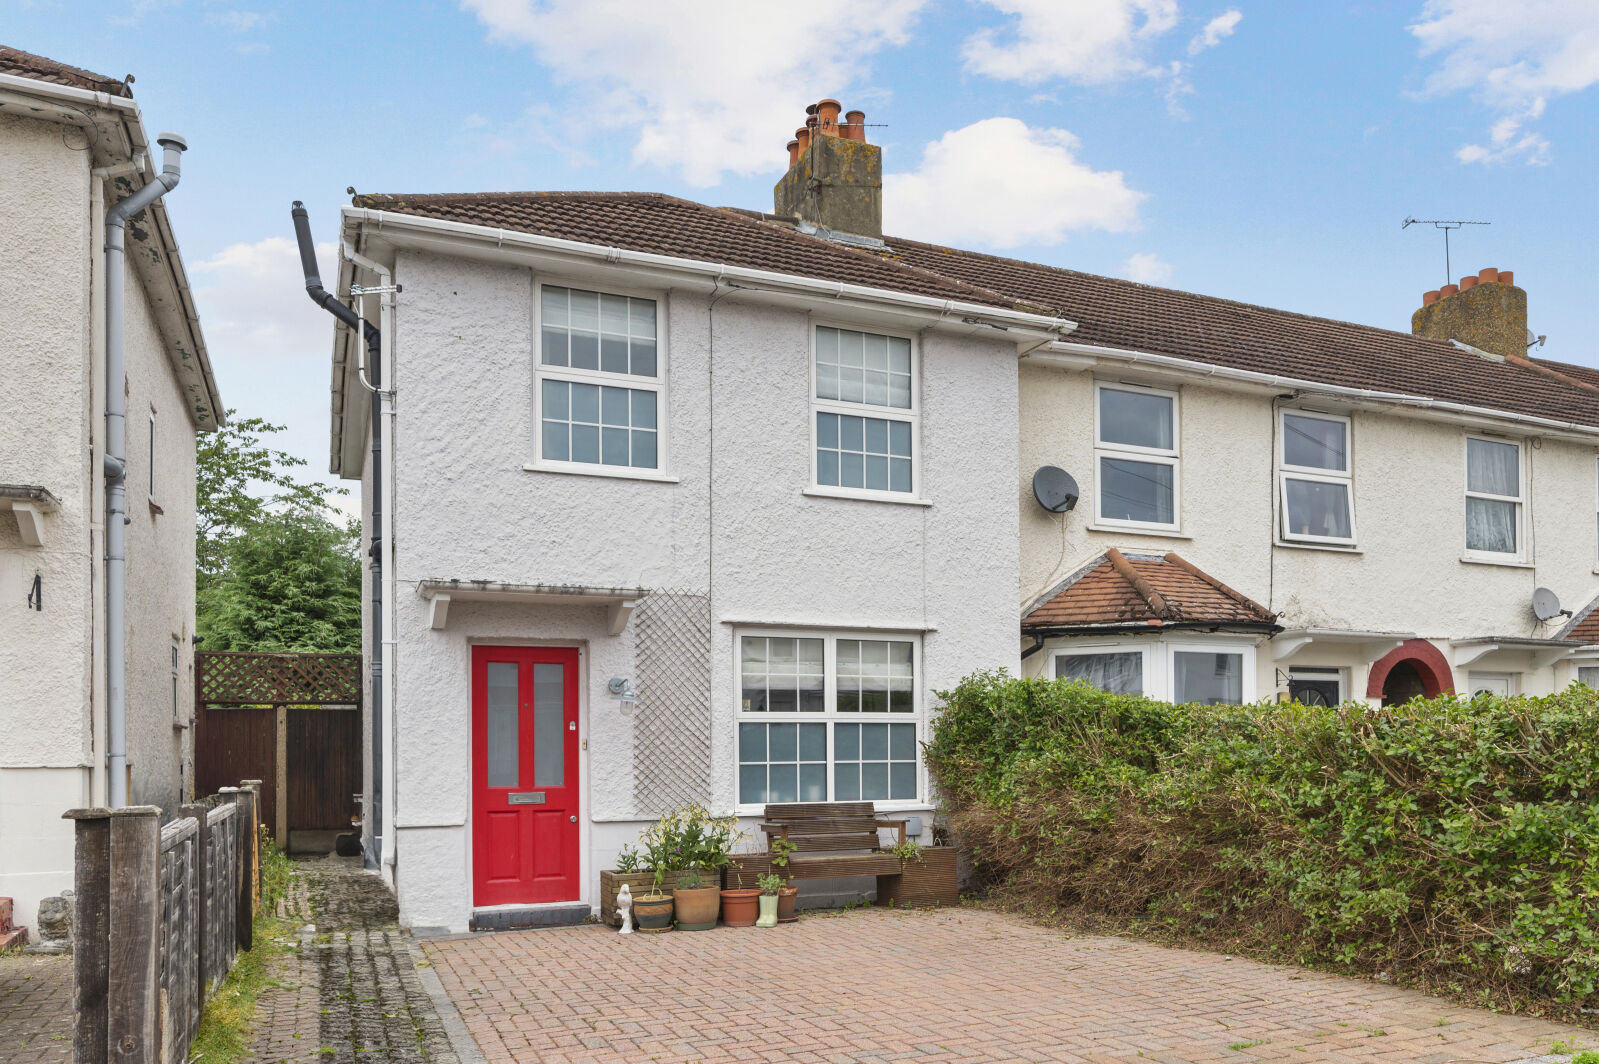 3 bedroom end terraced house for sale Whatley Avenue, London, SW20, main image